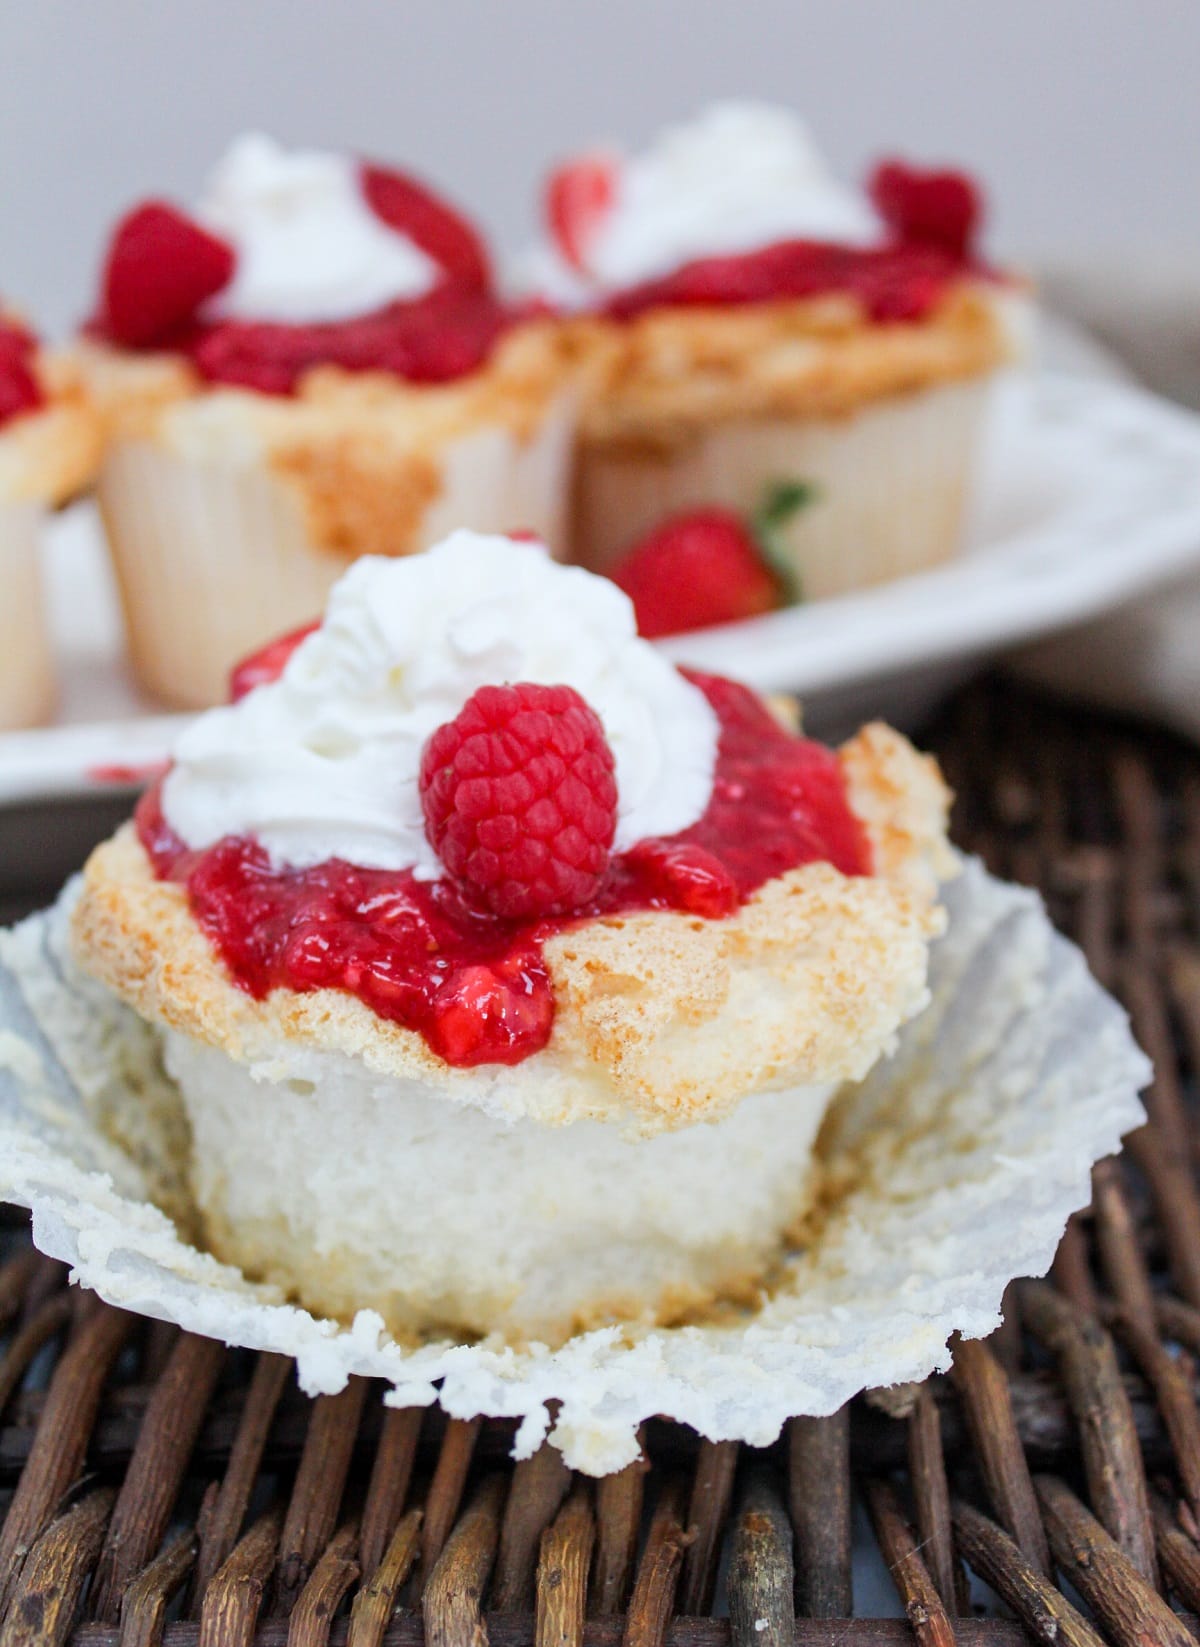 unwraped cupcake with berries and whipped cream on top.